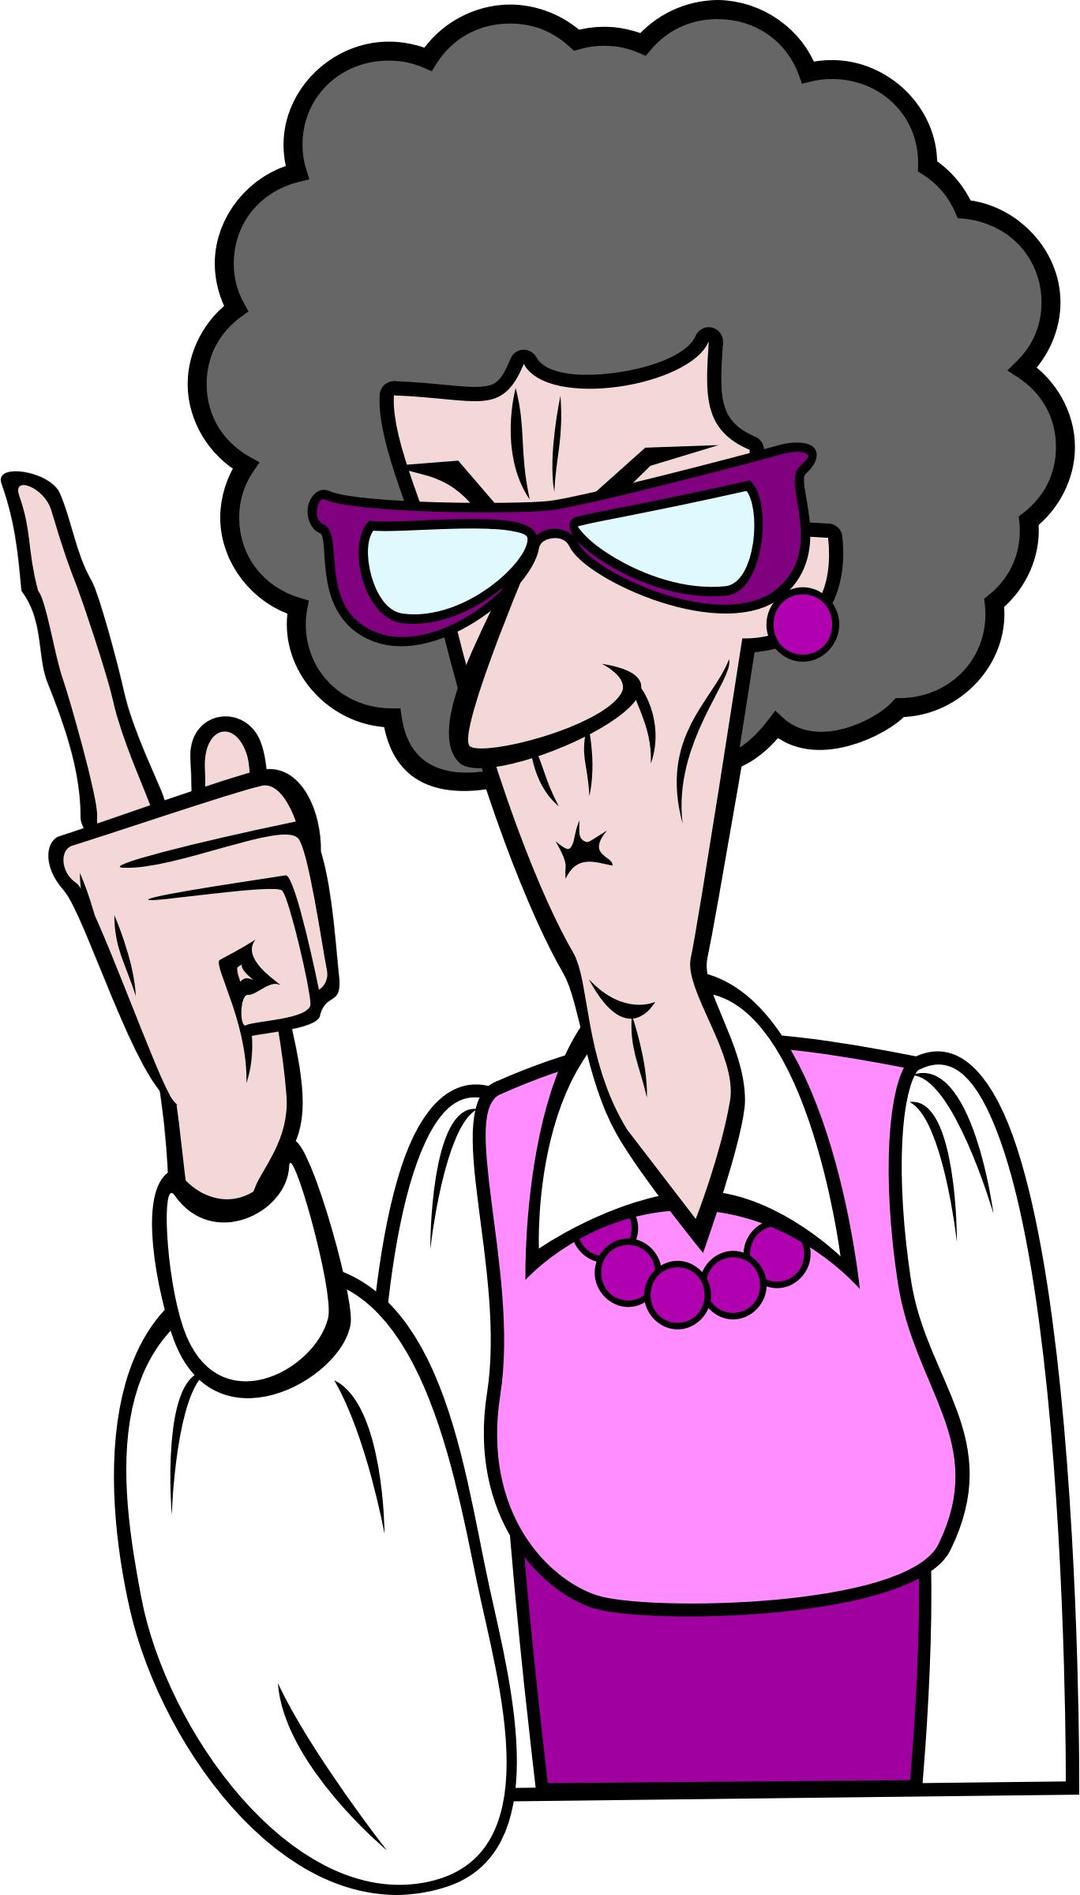 Pointing Old Woman png transparent